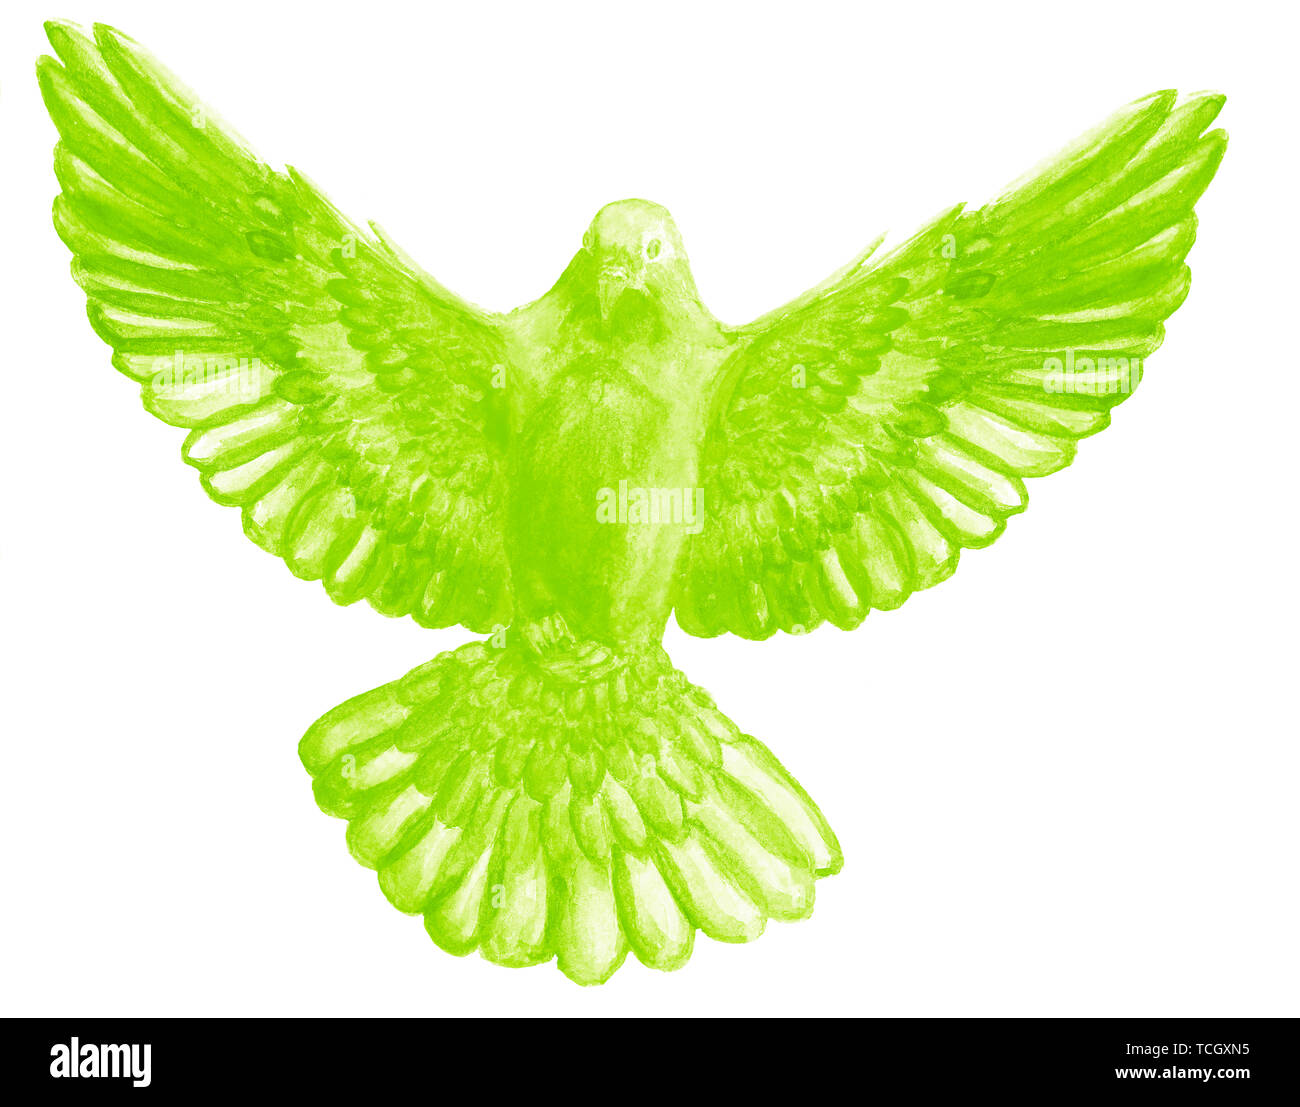 Watercolor and digital watercolor illustration of unicolor bird, pigeon in lime, green color, symbol of the Holy Spirit, isolated on white background. Stock Photo